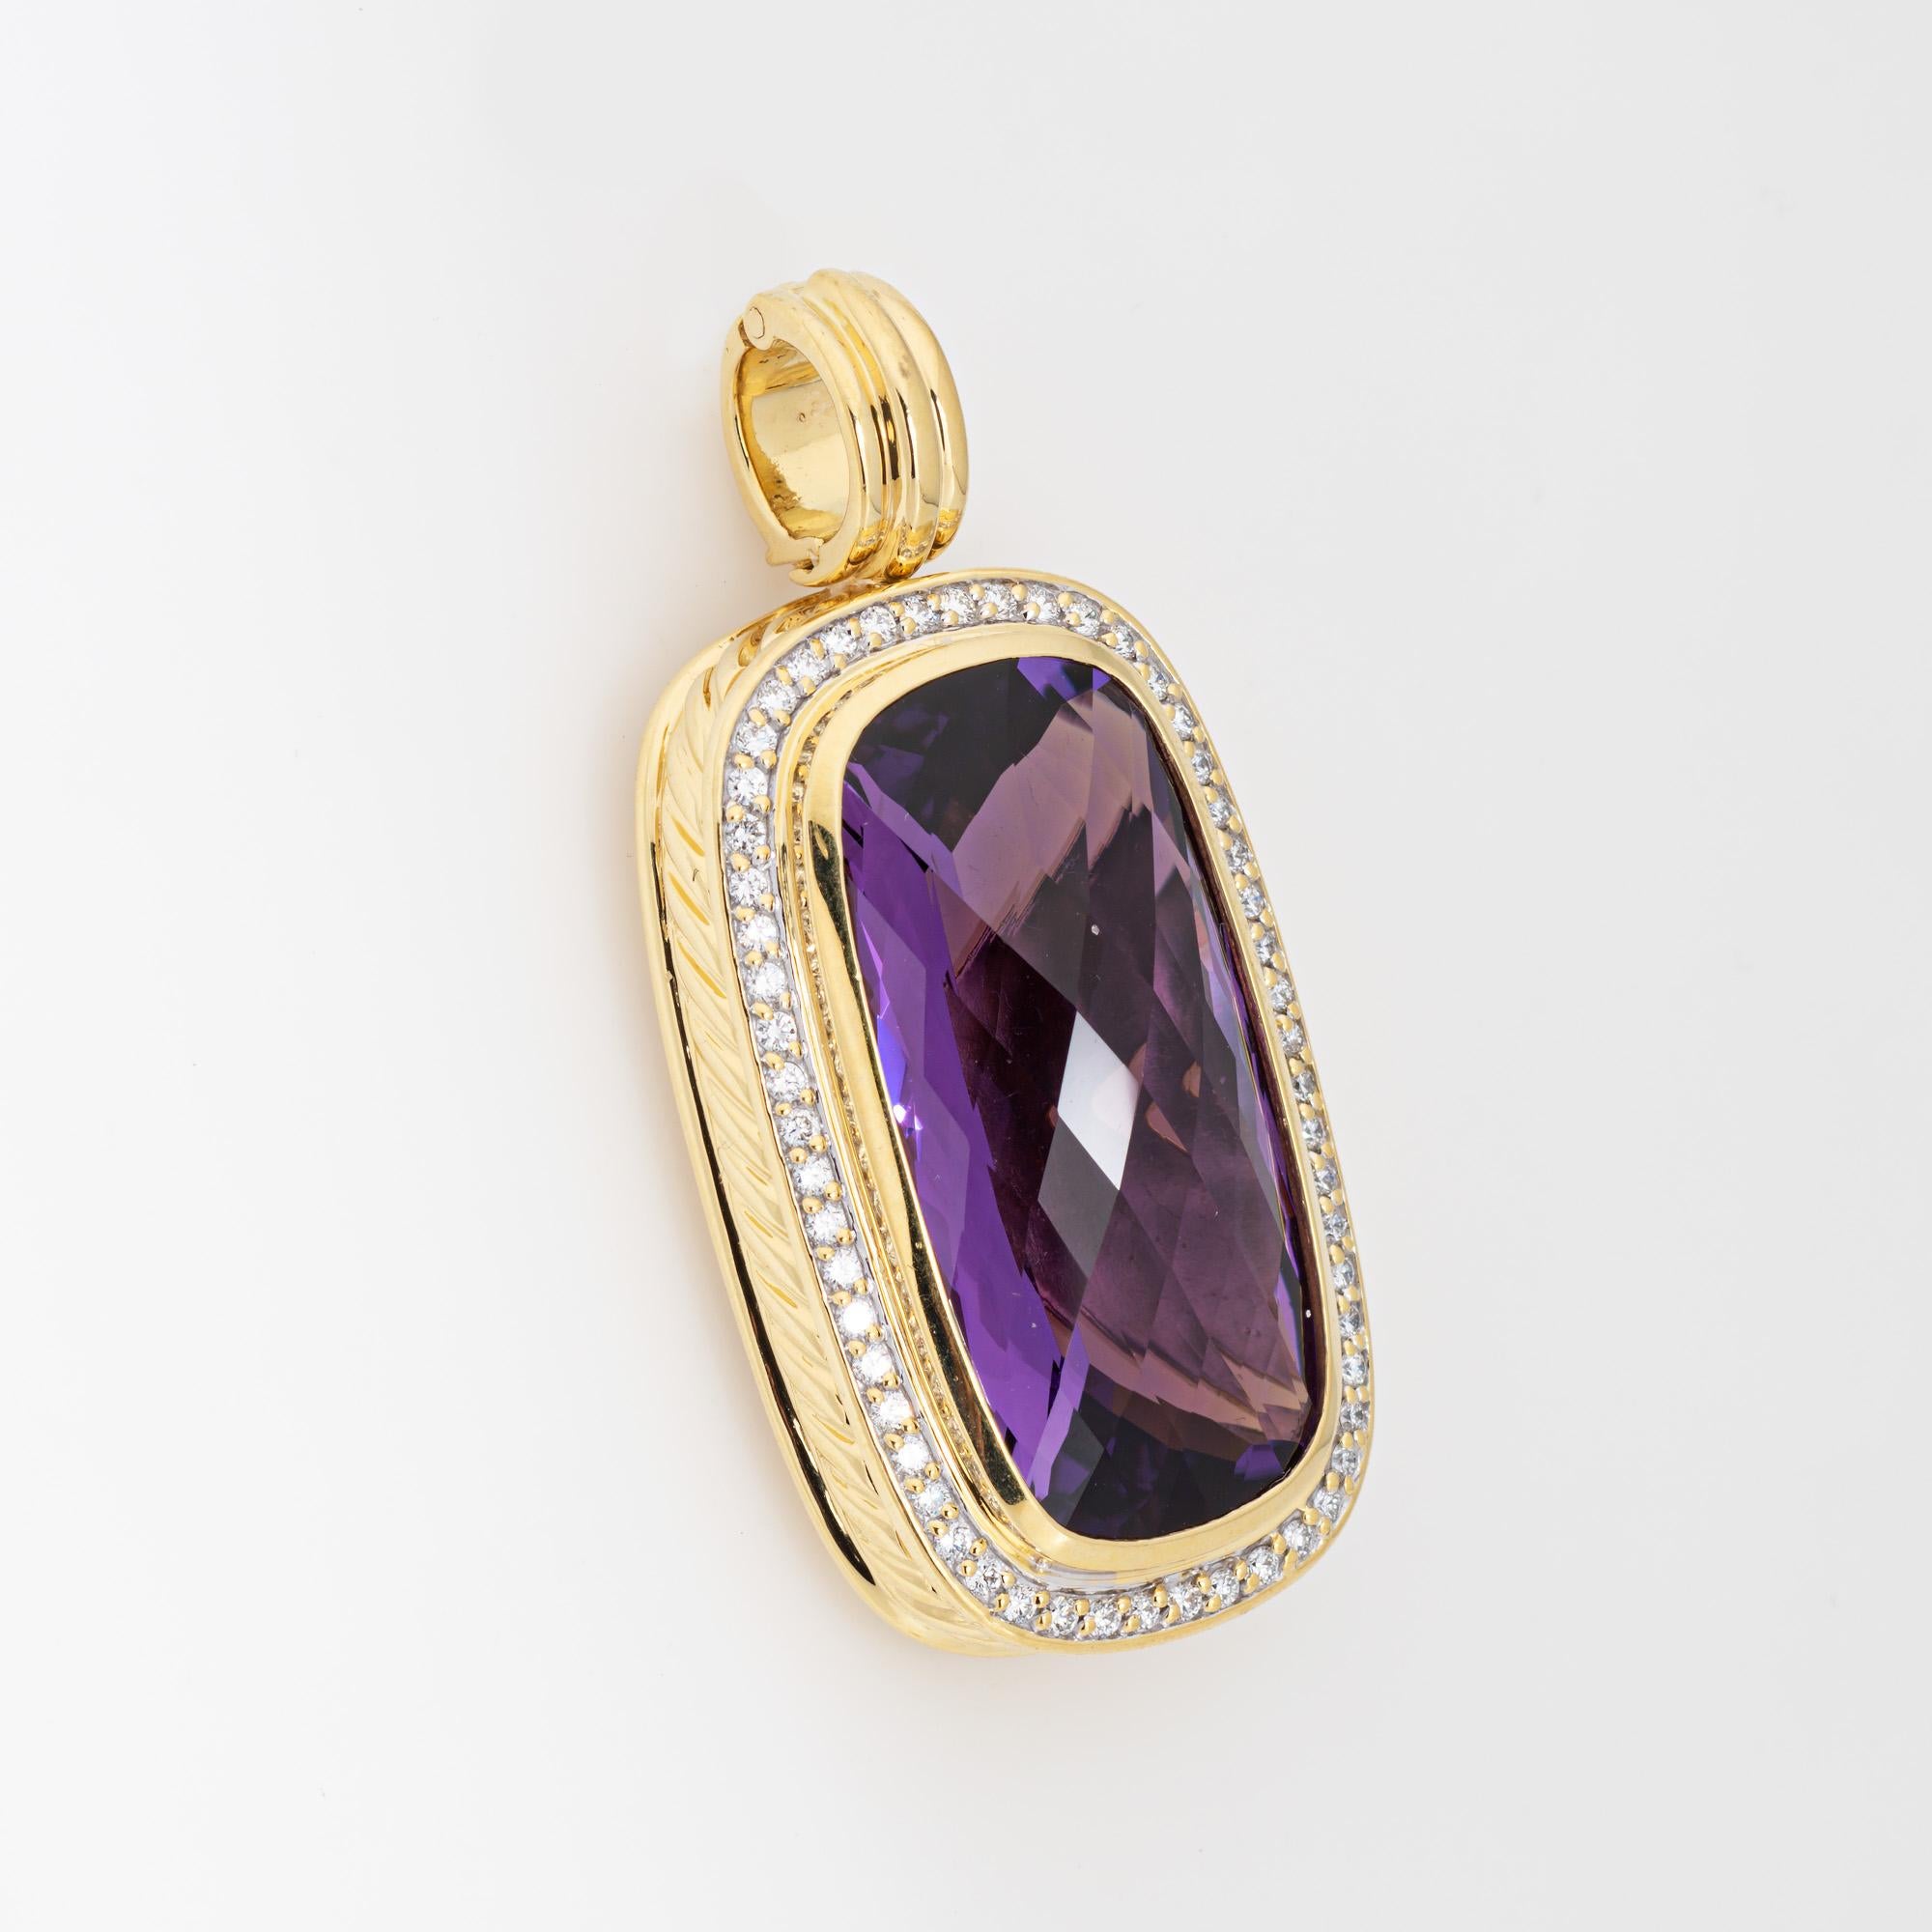 Stylish David Yurman Albion amethyst & diamond enhancer crafted in 18k yellow gold.  

Round brilliant cut diamonds total an estimated 0.56 carats (estimated at H-I color and VS2-SI2 clarity). The amethyst measures 30mm x 15mm (in very good